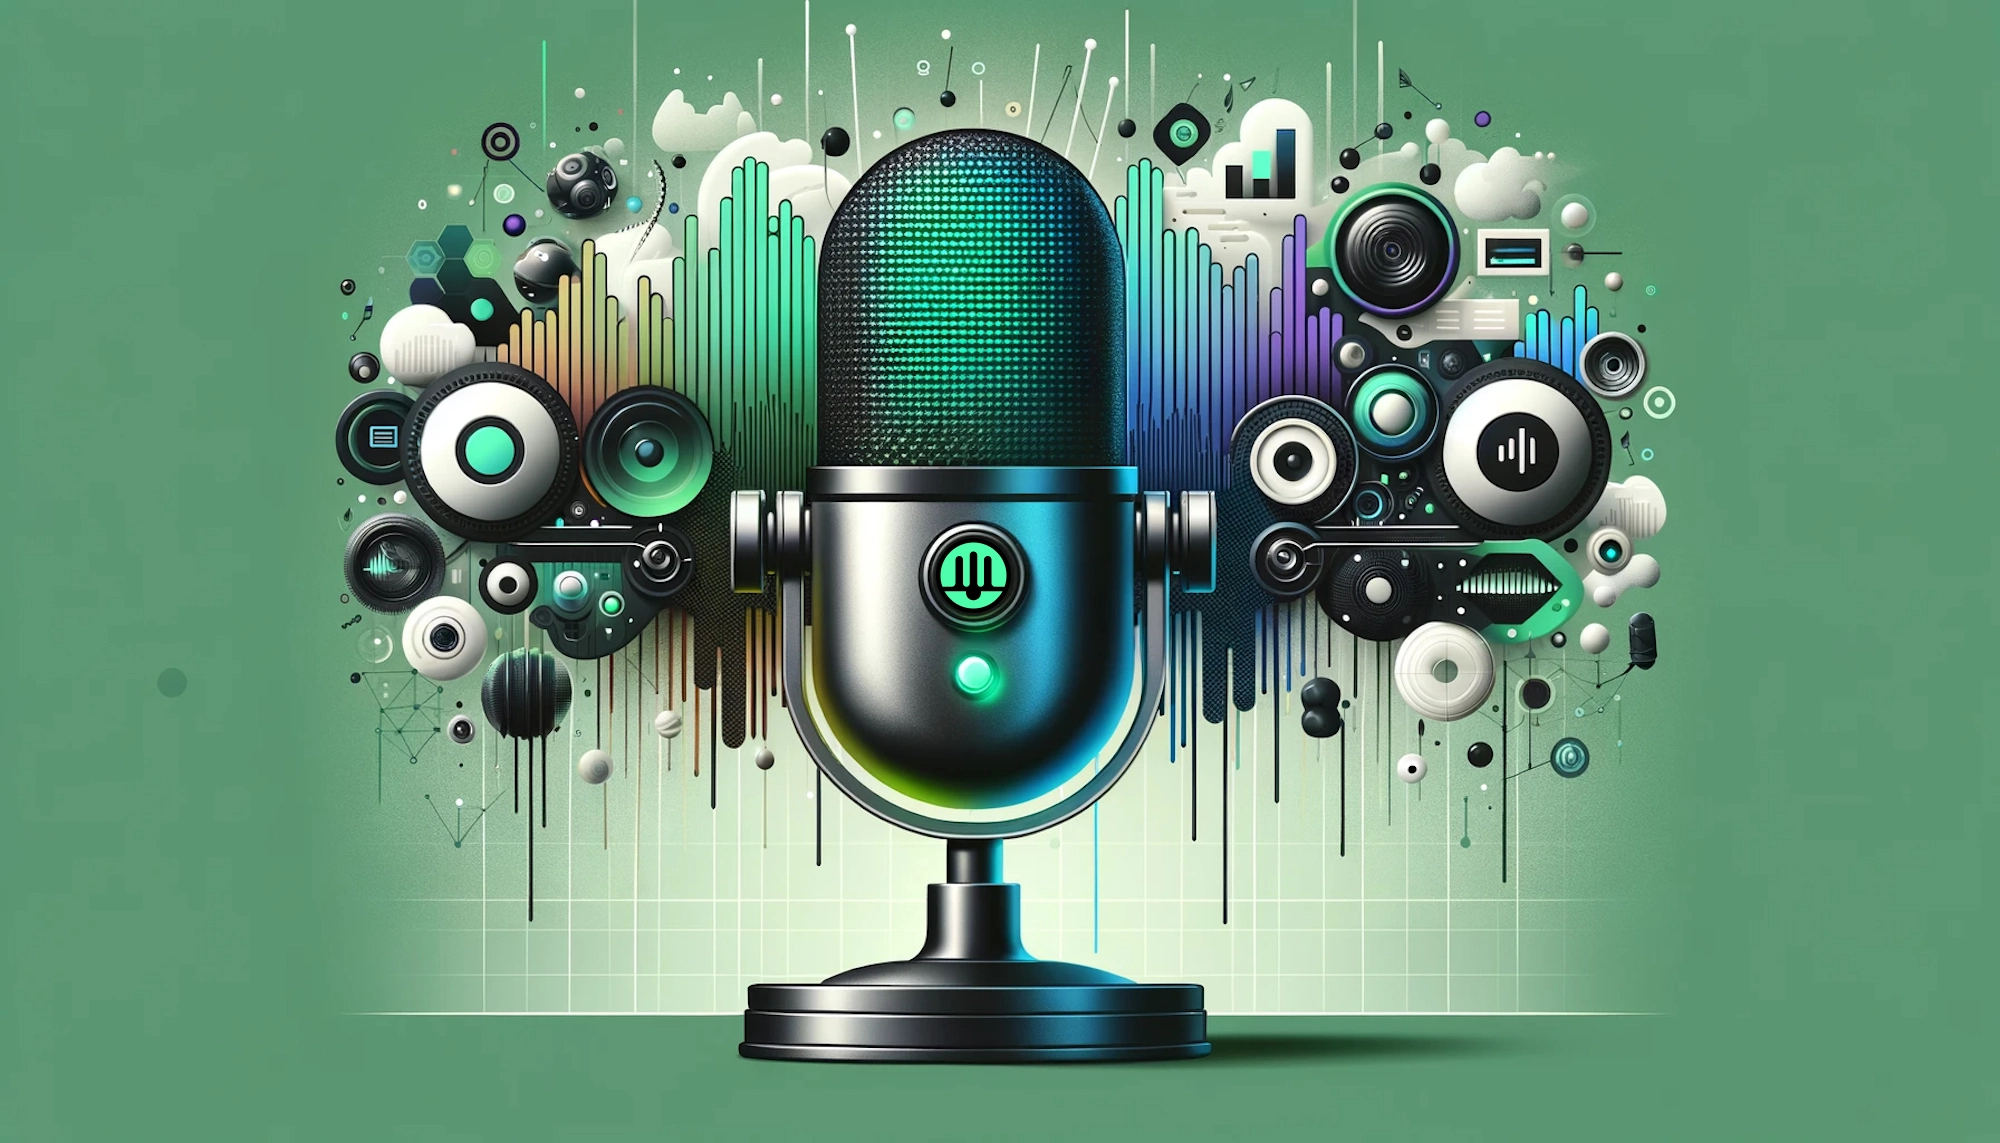 Microphone with DeepCast logo surrounded by loudspeakers, microphones, and sound waves